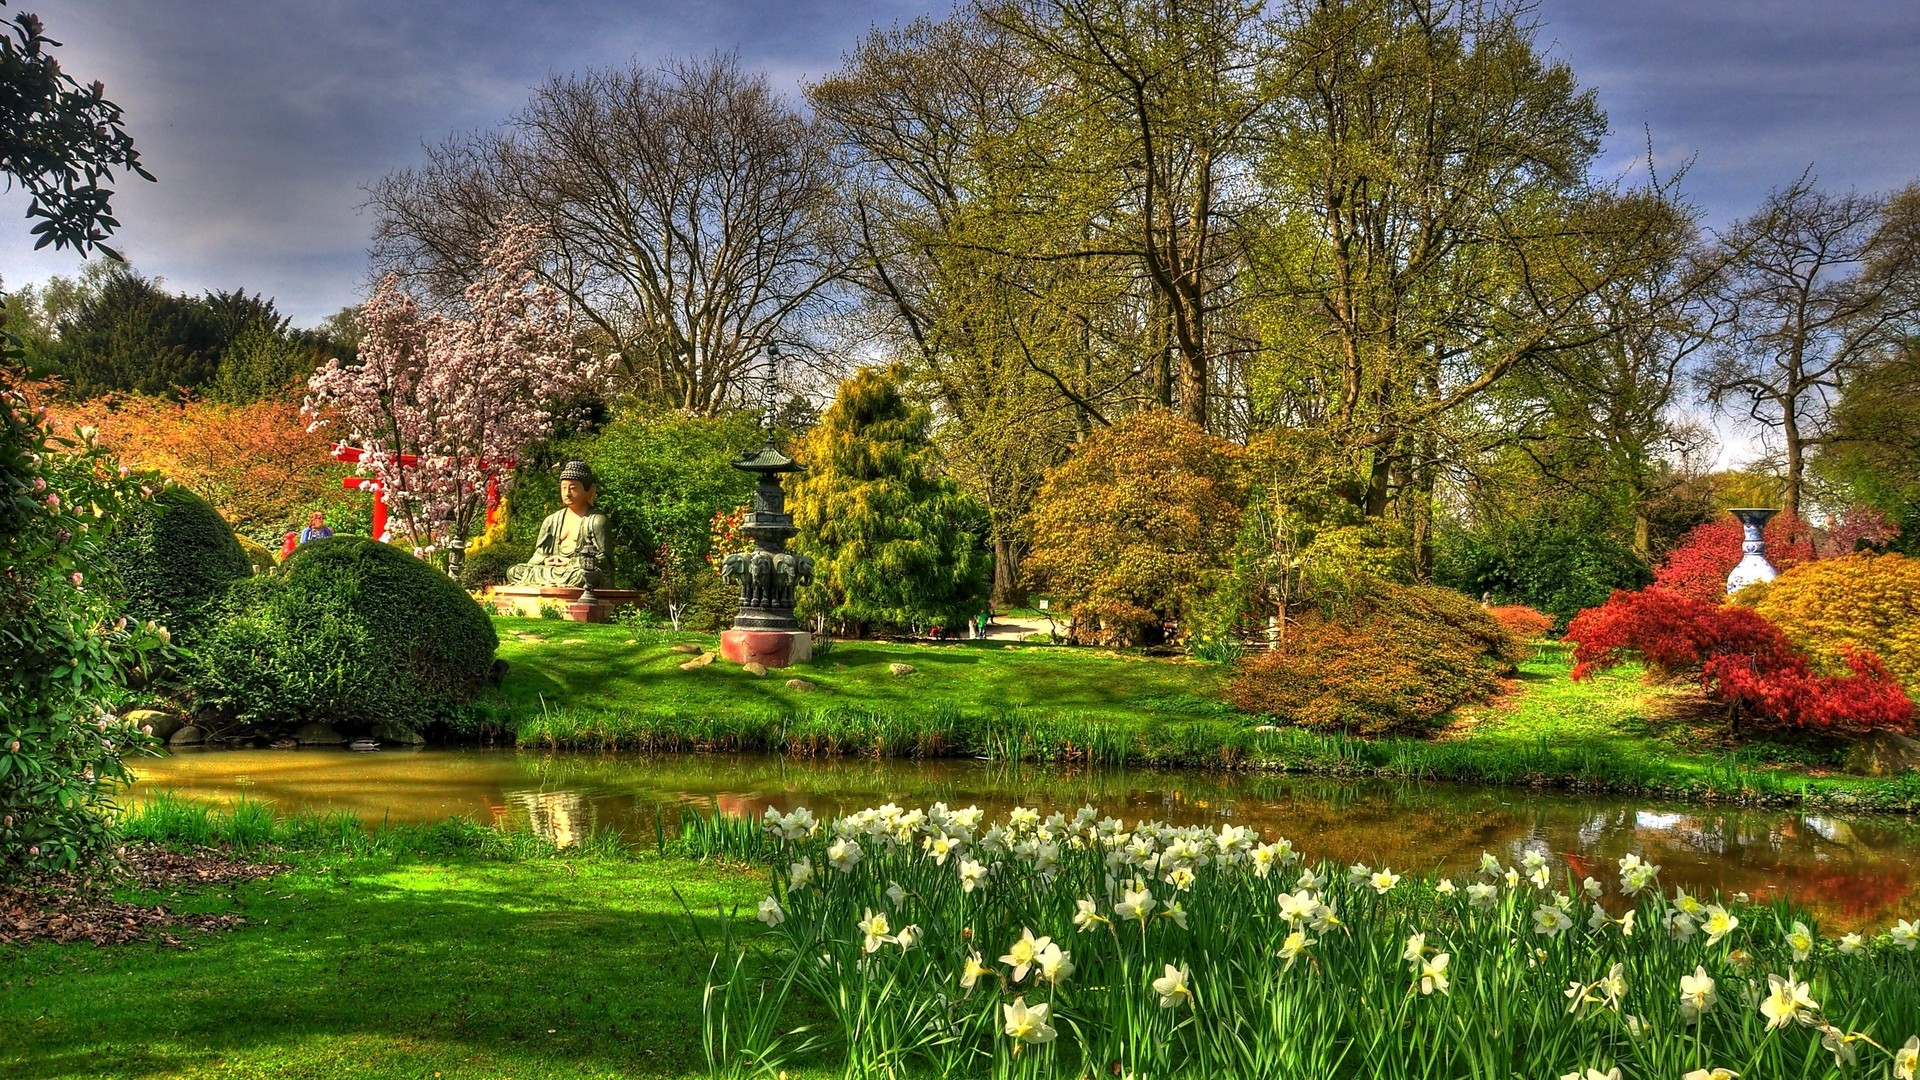 1920x1080 wallpapers: flowers, daffodils, pond, garden, statues (image)